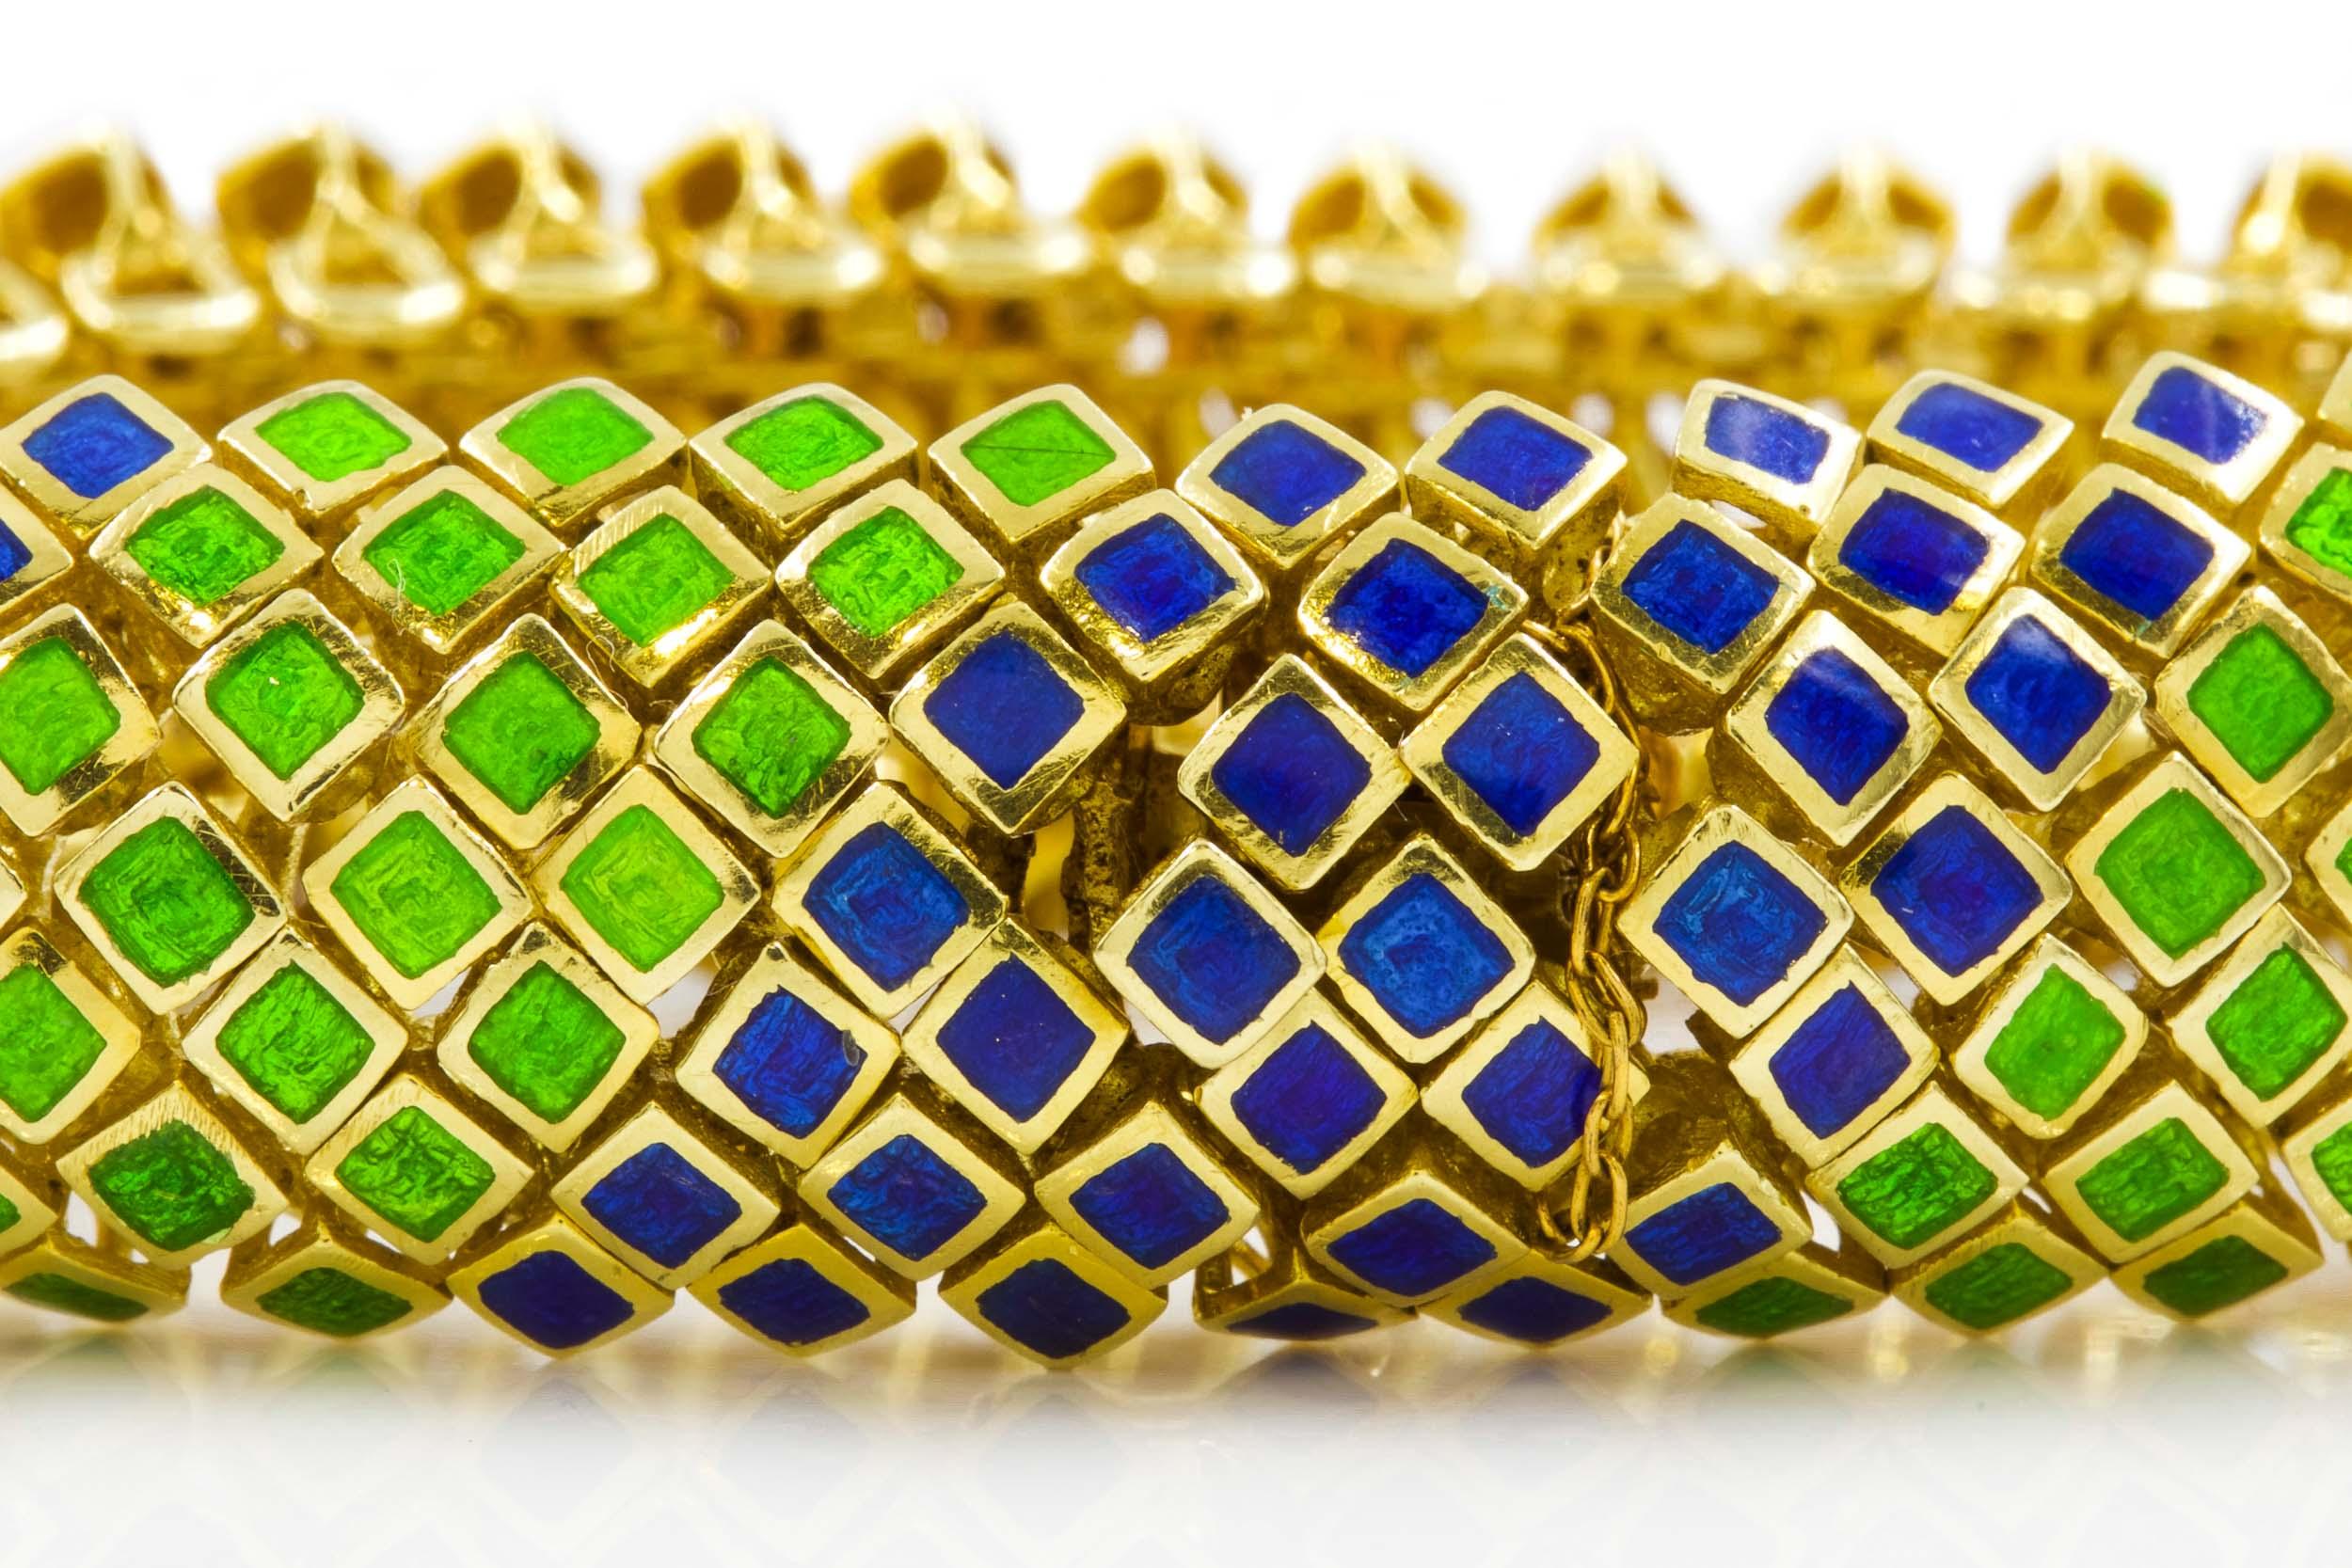 RETRO 18K GOLD AND ENAMEL FLEXIBLE-LINK BRACELET
With cobalt blue and translucent green enamel  circa 1960s
Item # 109TQV22R 

A finely crafted work of art, this intricate flexible-link bracelet is an incredibly fun and playful statement piece. Each